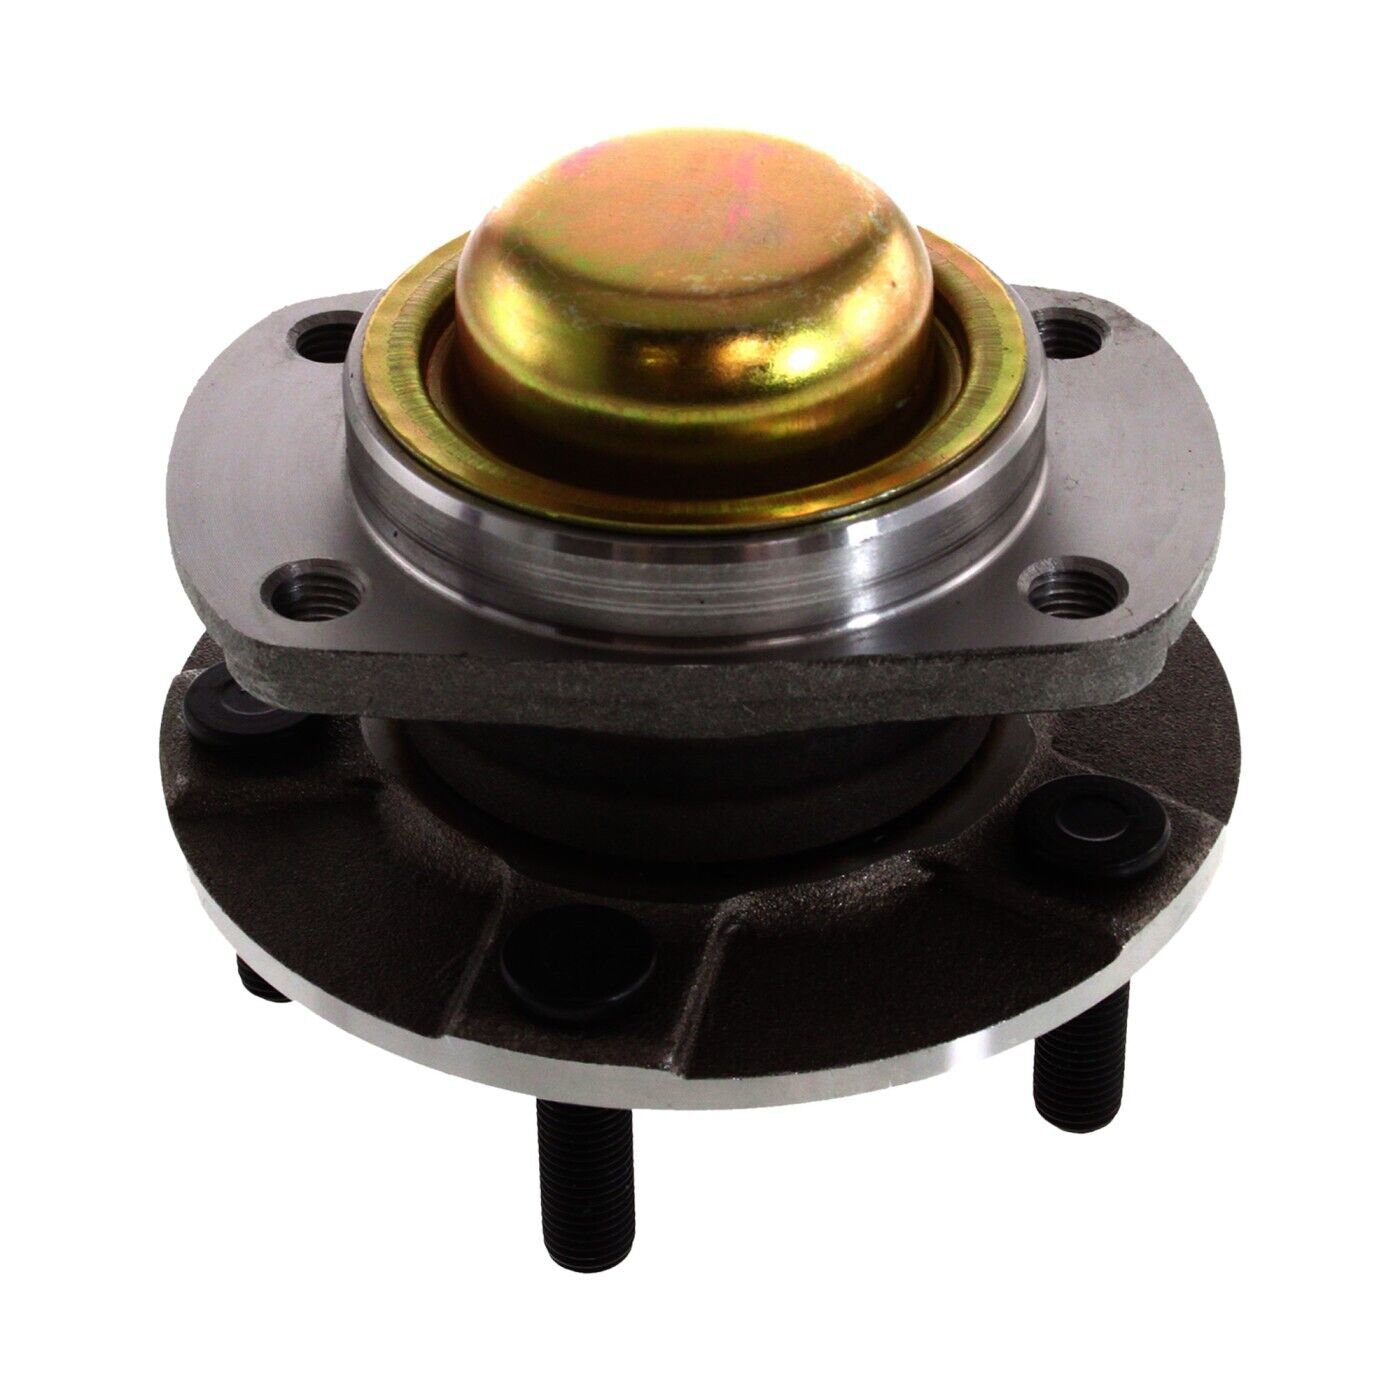 Wheel Hubs Rear for Town and Country Dodge Caravan Chrysler & Grand Voyager